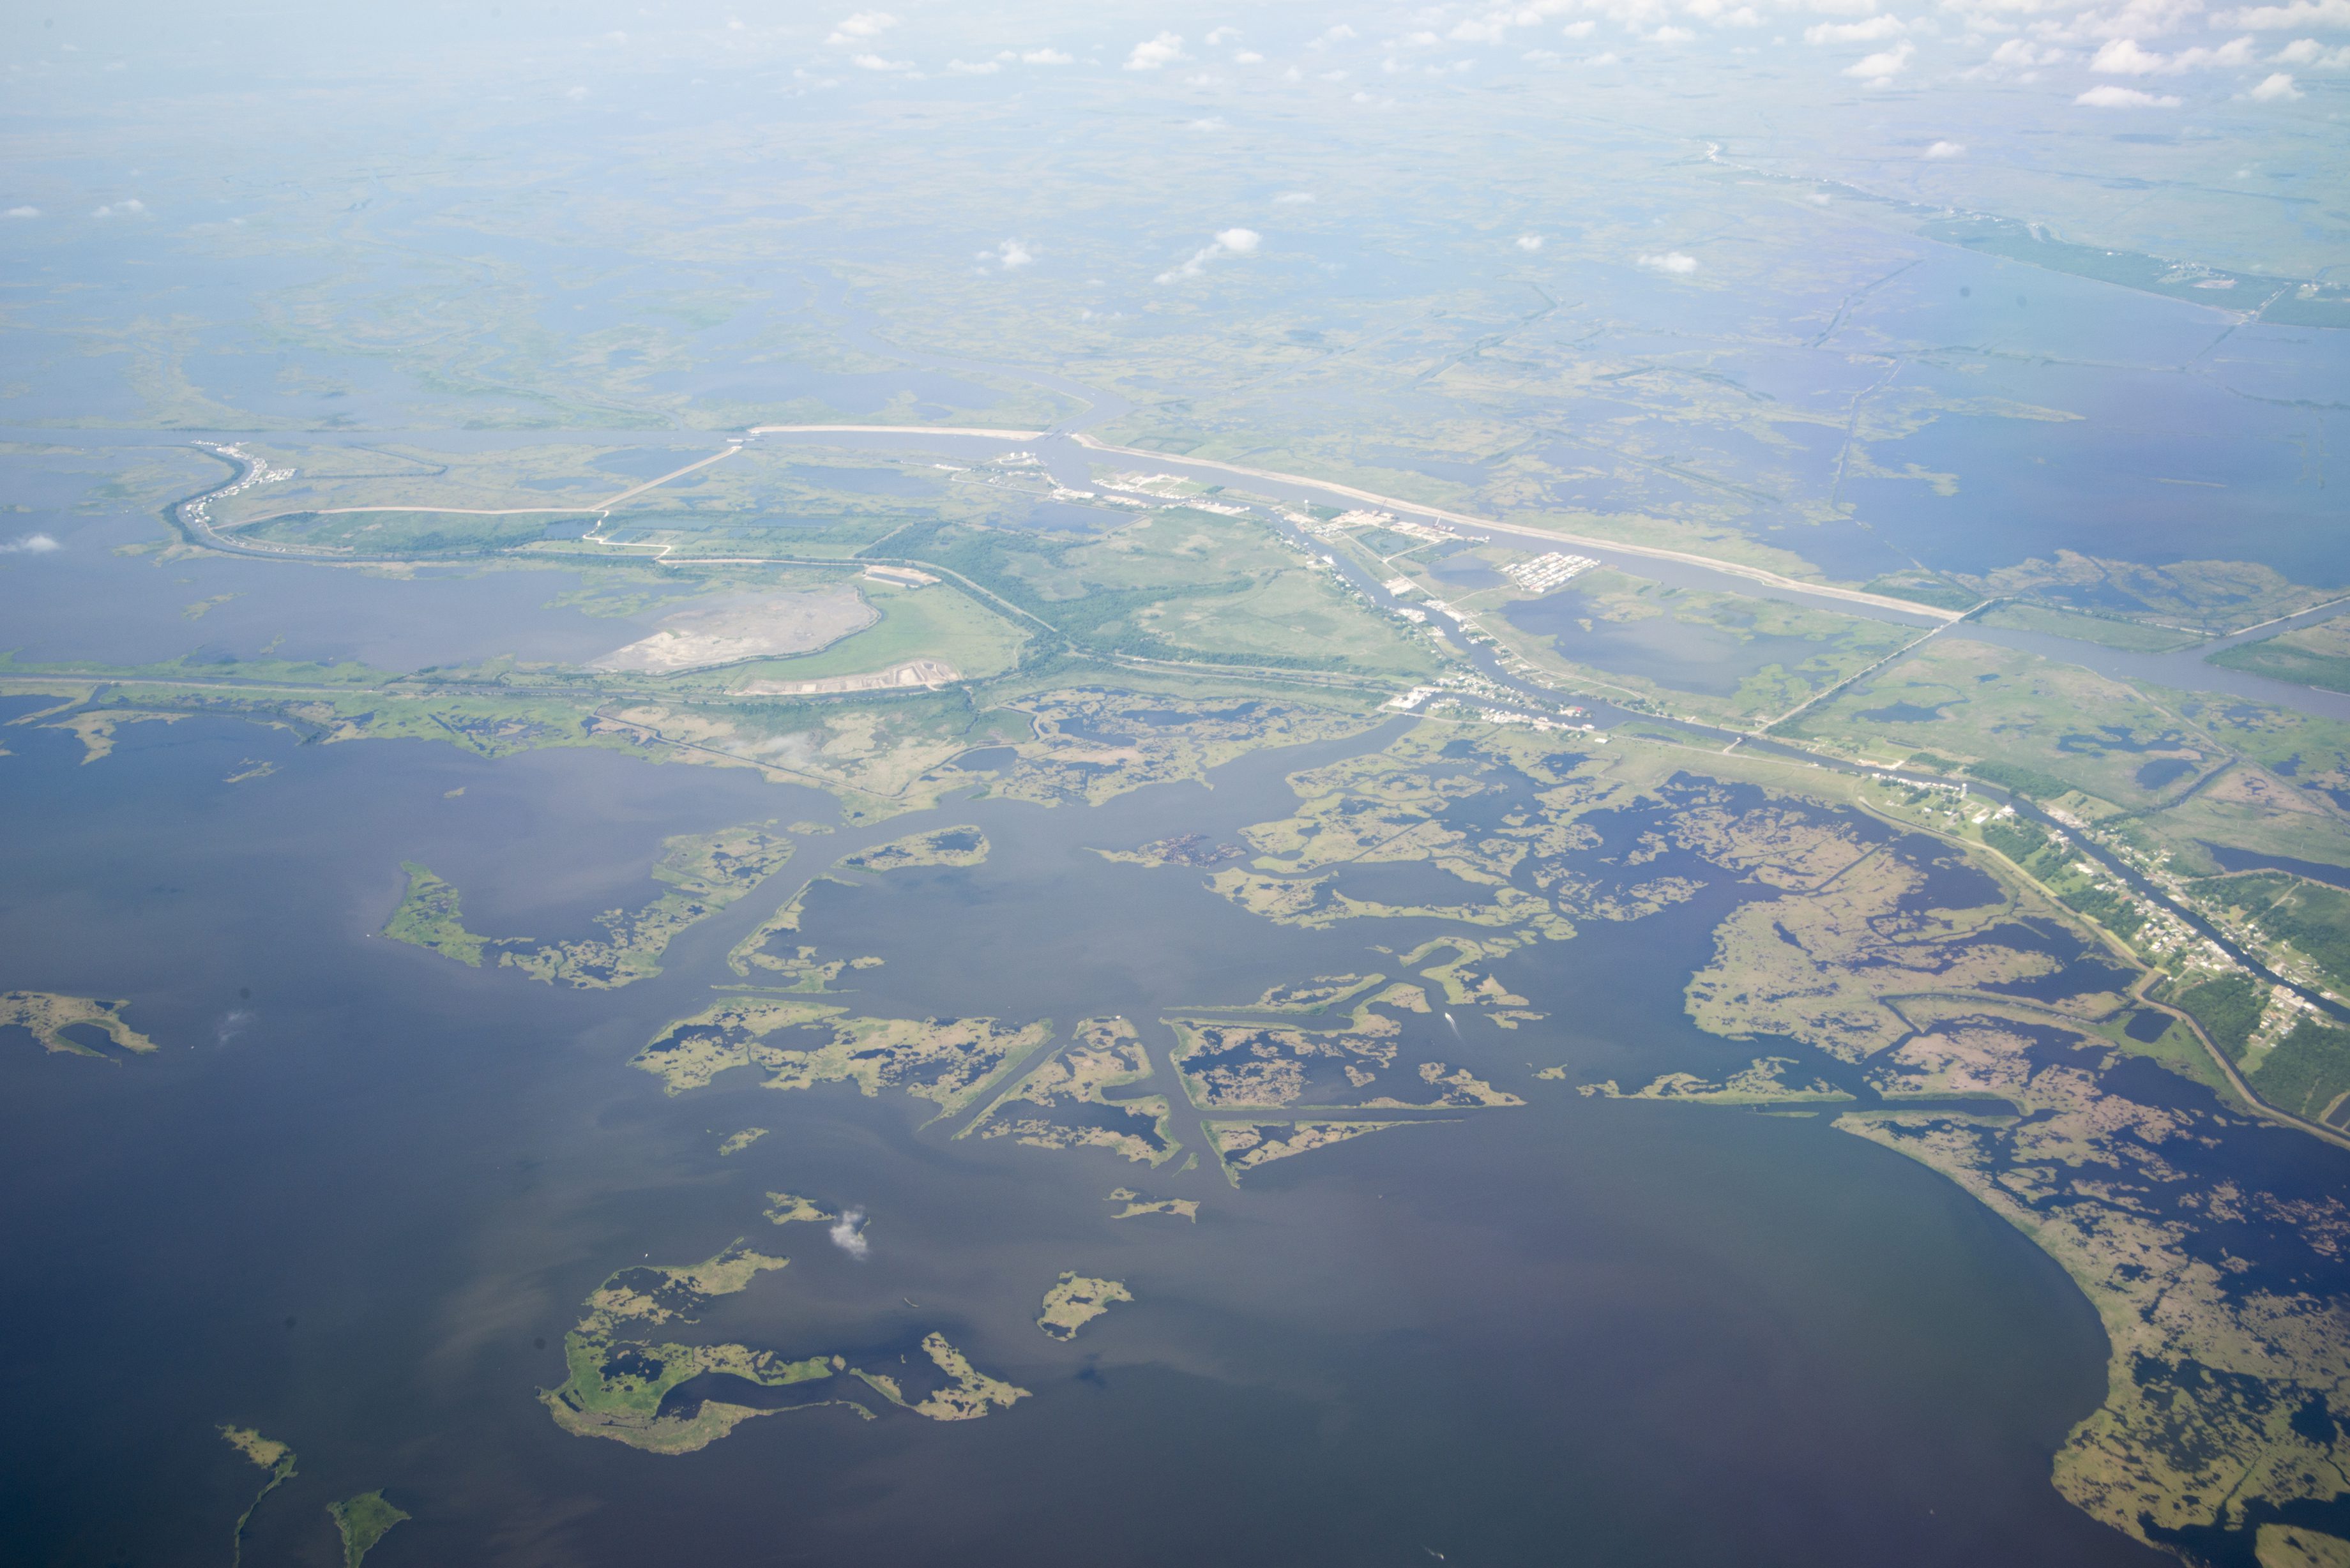 NASA Completes Intensive Study of Louisiana Gulf Coast Levees and Wetlands